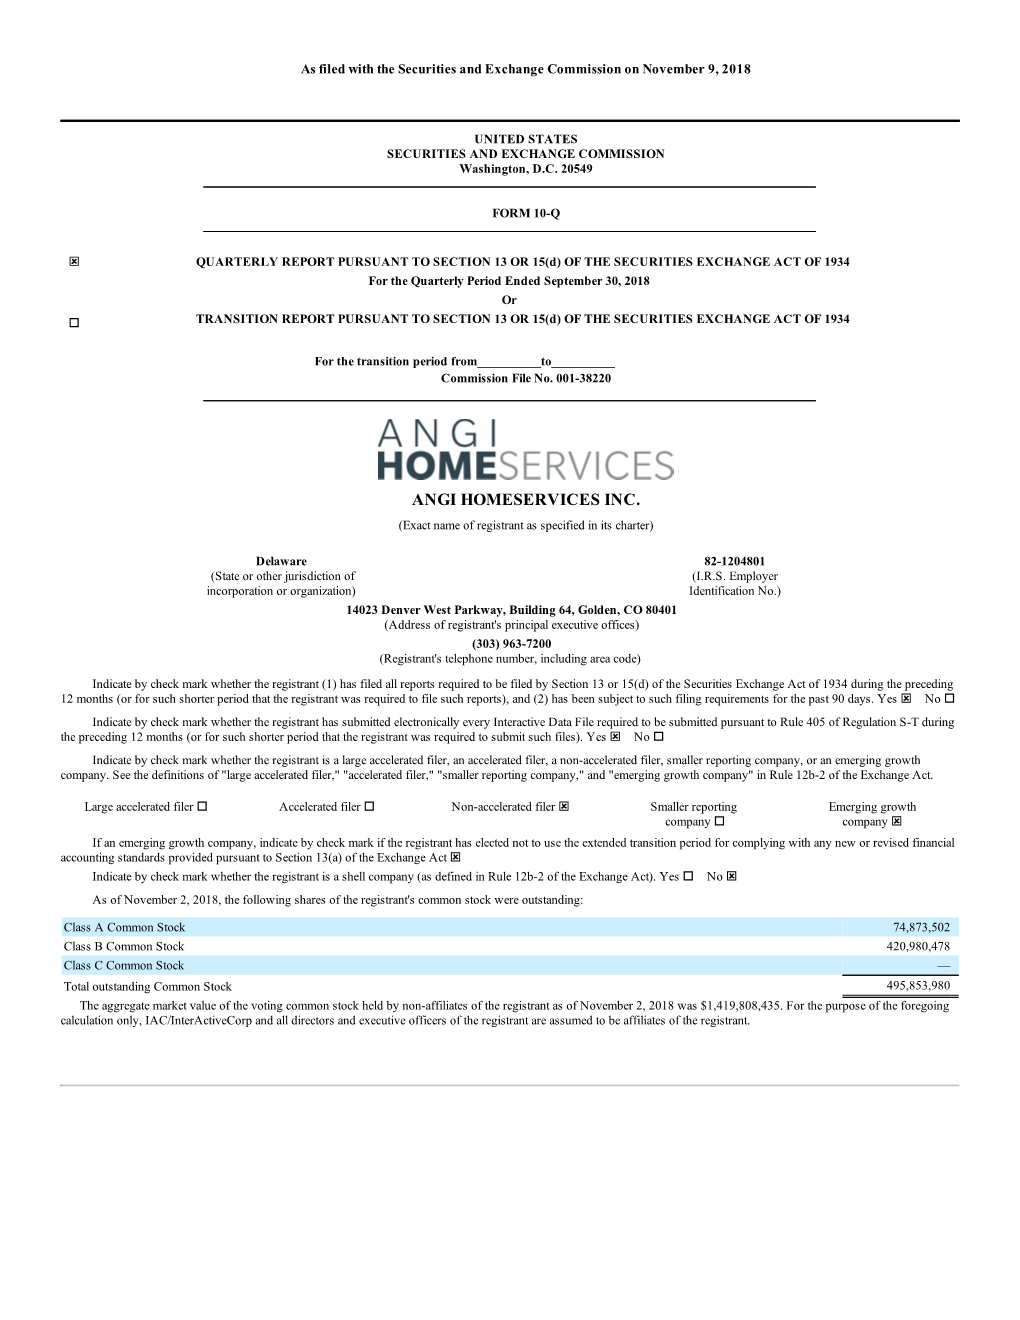 ANGI HOMESERVICES INC. (Exact Name of Registrant As Specified in Its Charter)